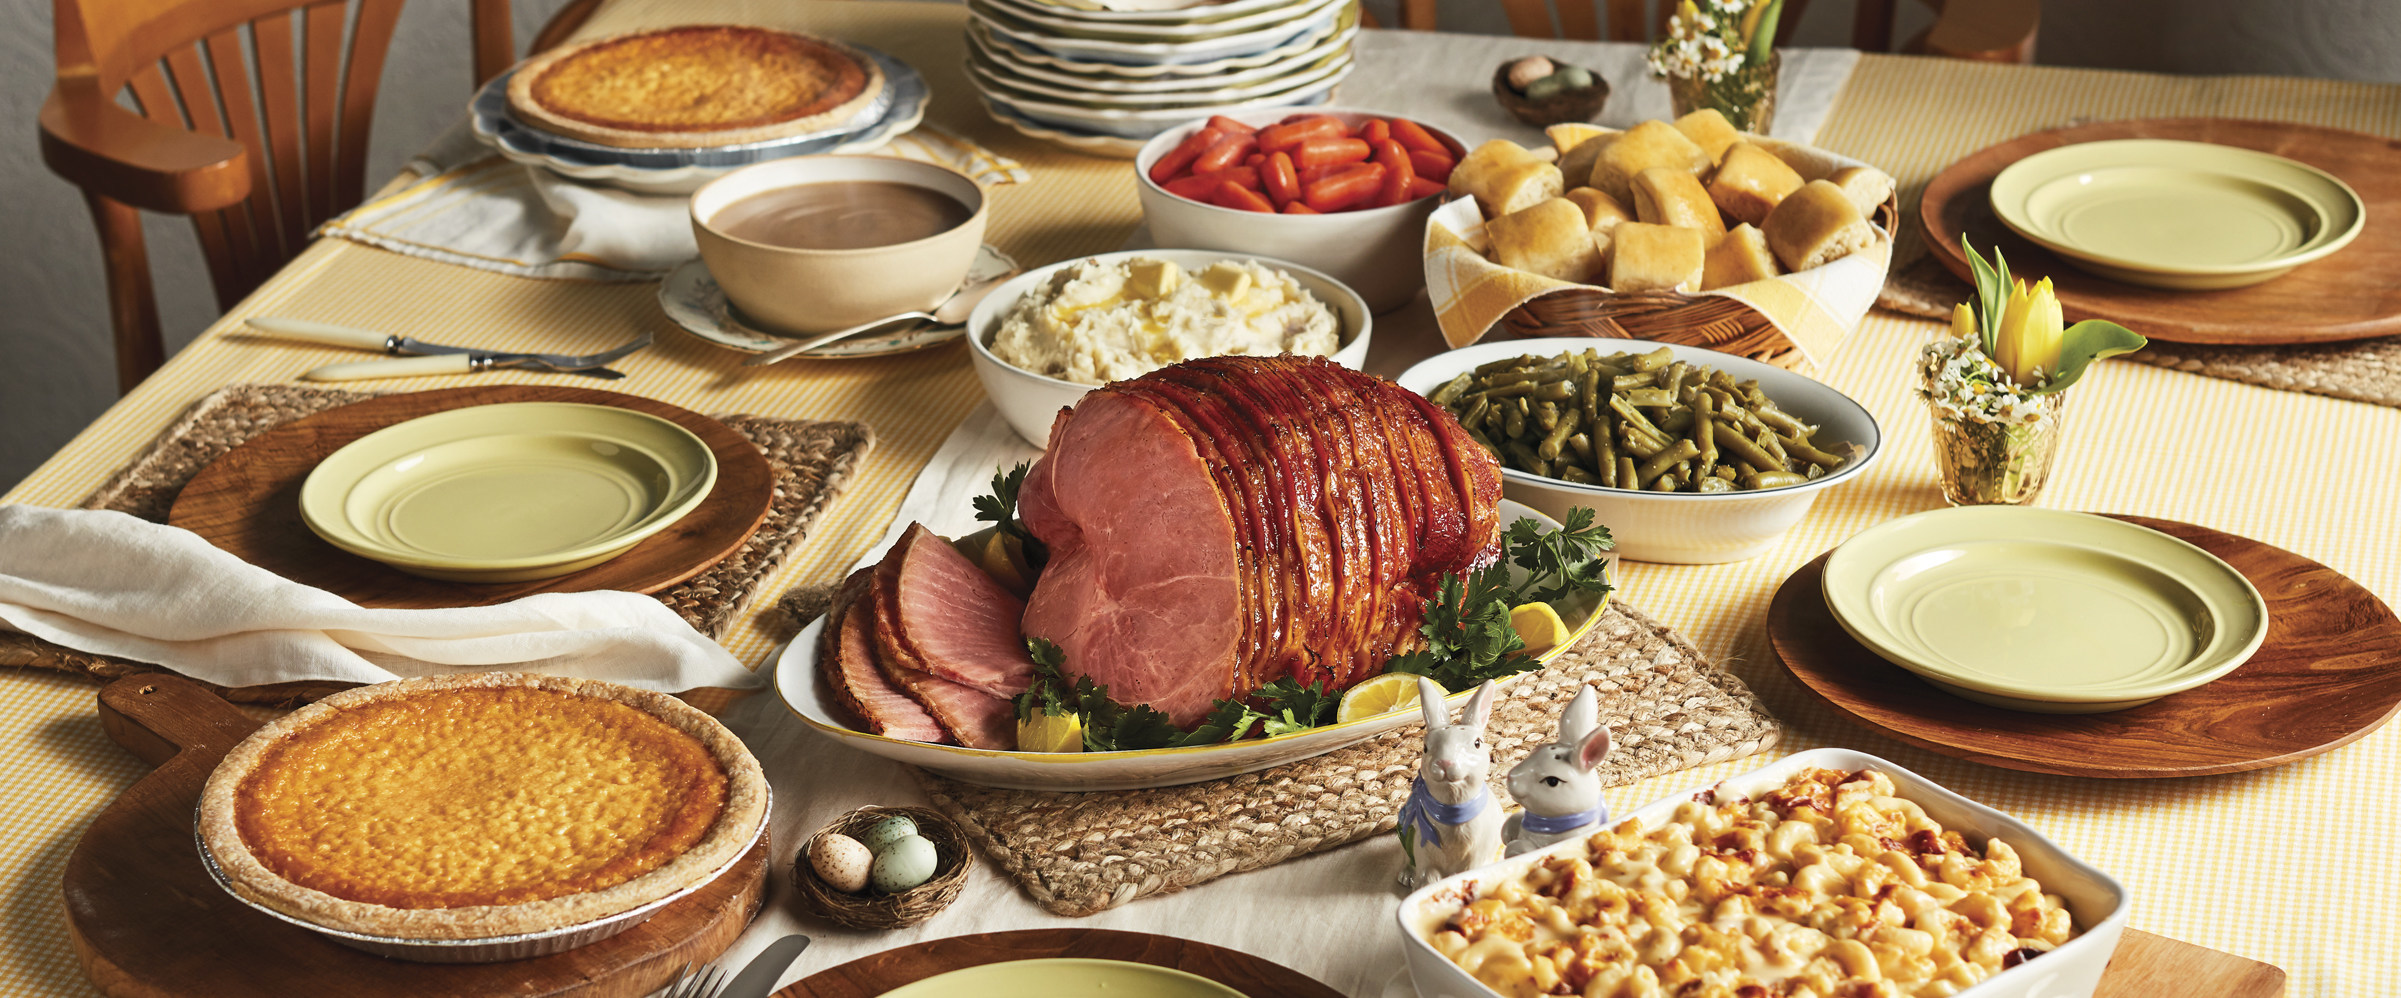 Cracker Barrel Christmas Meal / Where To Get A Holiday ...